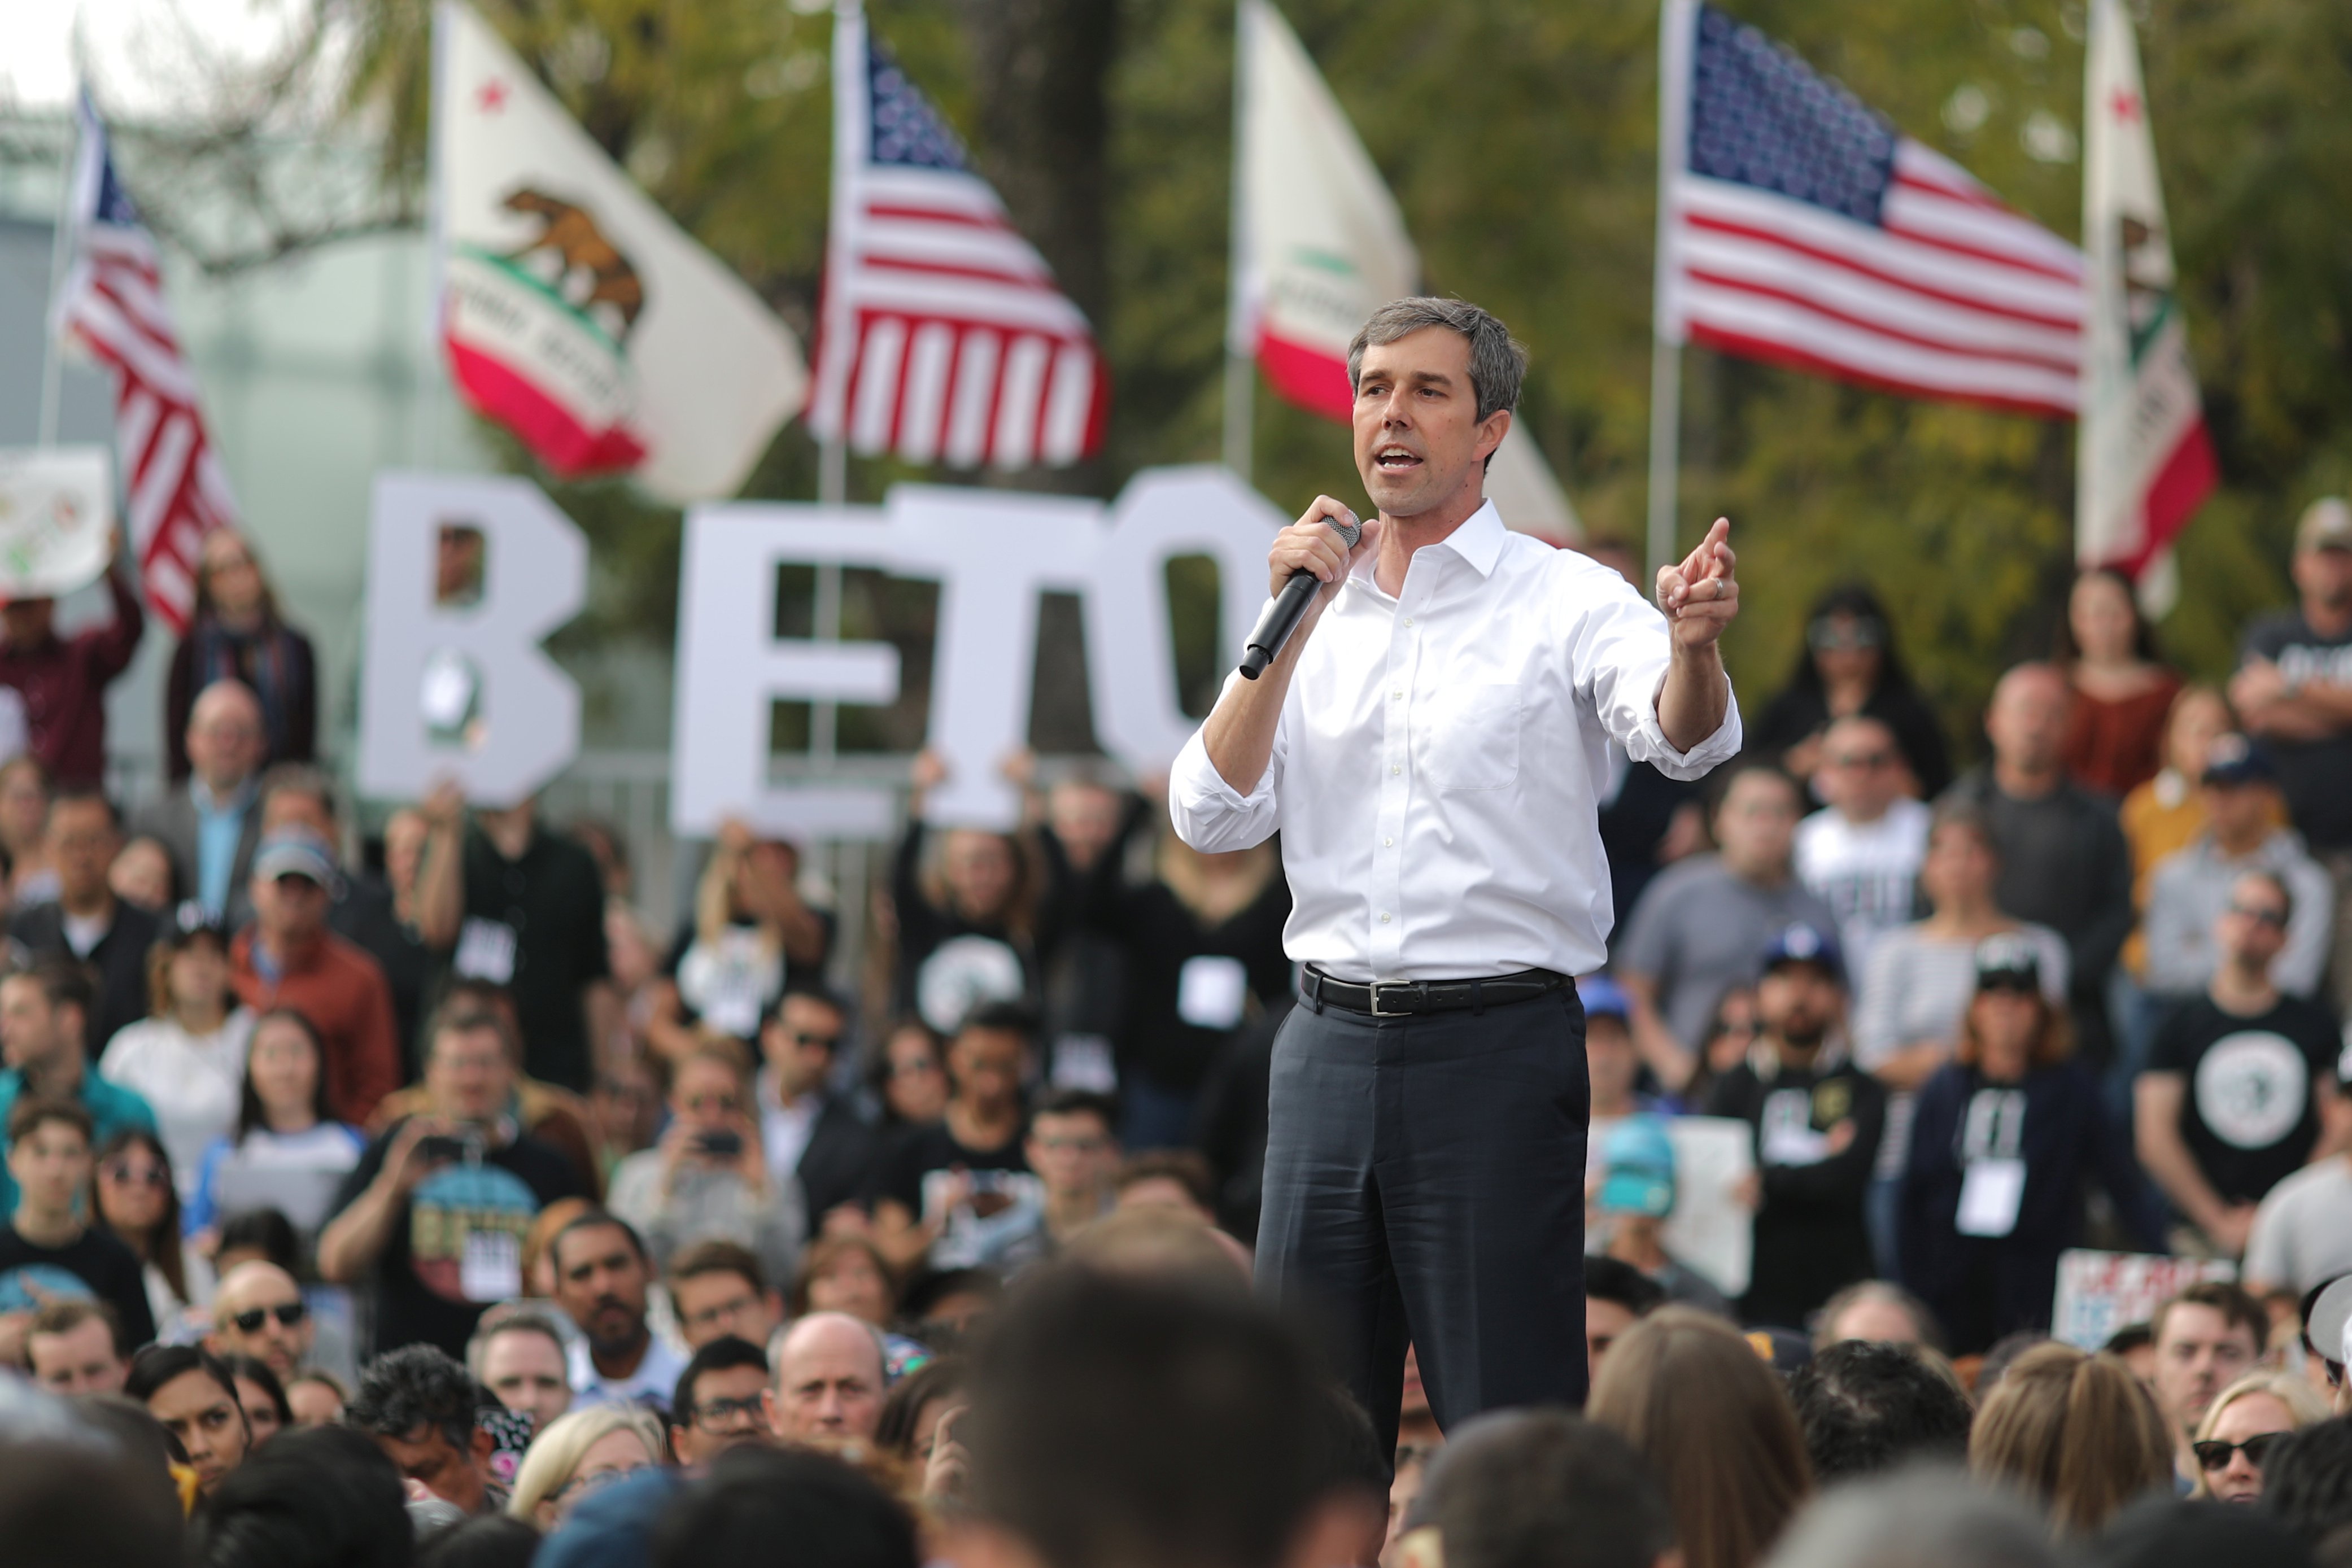 U.S. Democratic presidential candidate Beto O'Rourke speaks at a rally in Los Angeles